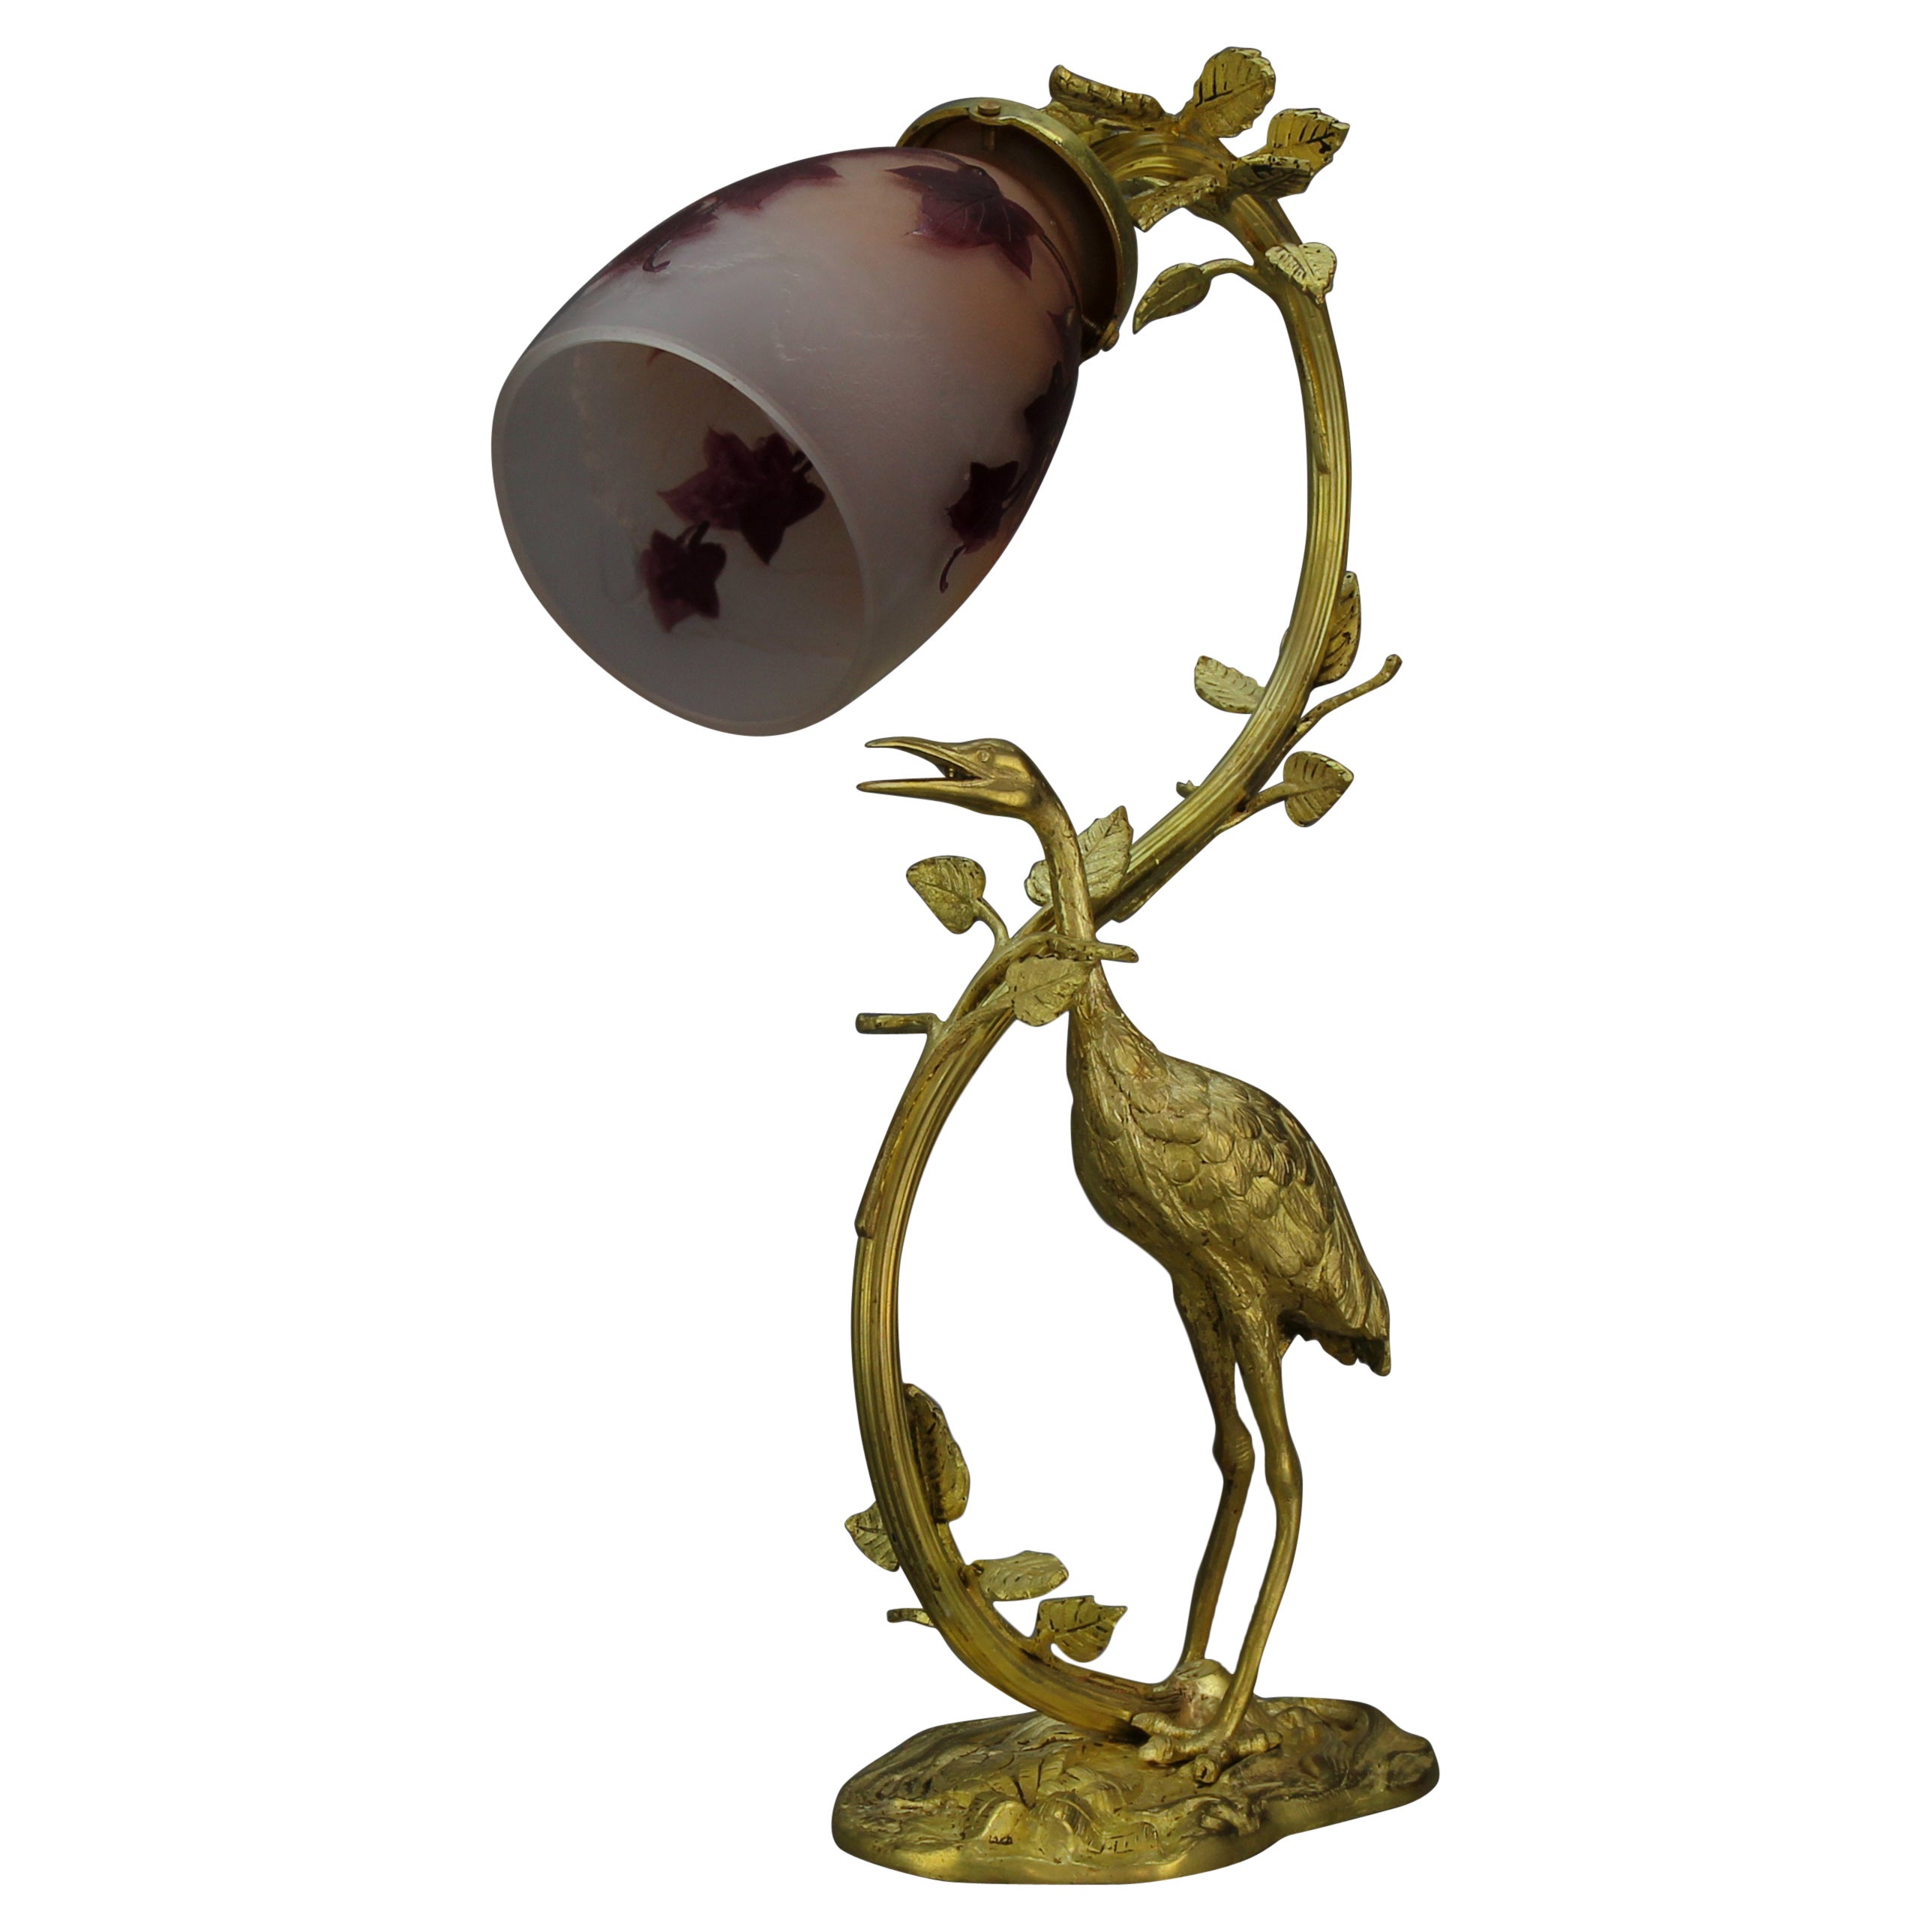 French Art Nouveau Gilt Bronze Table Lamp with Heron and Glass by Legras